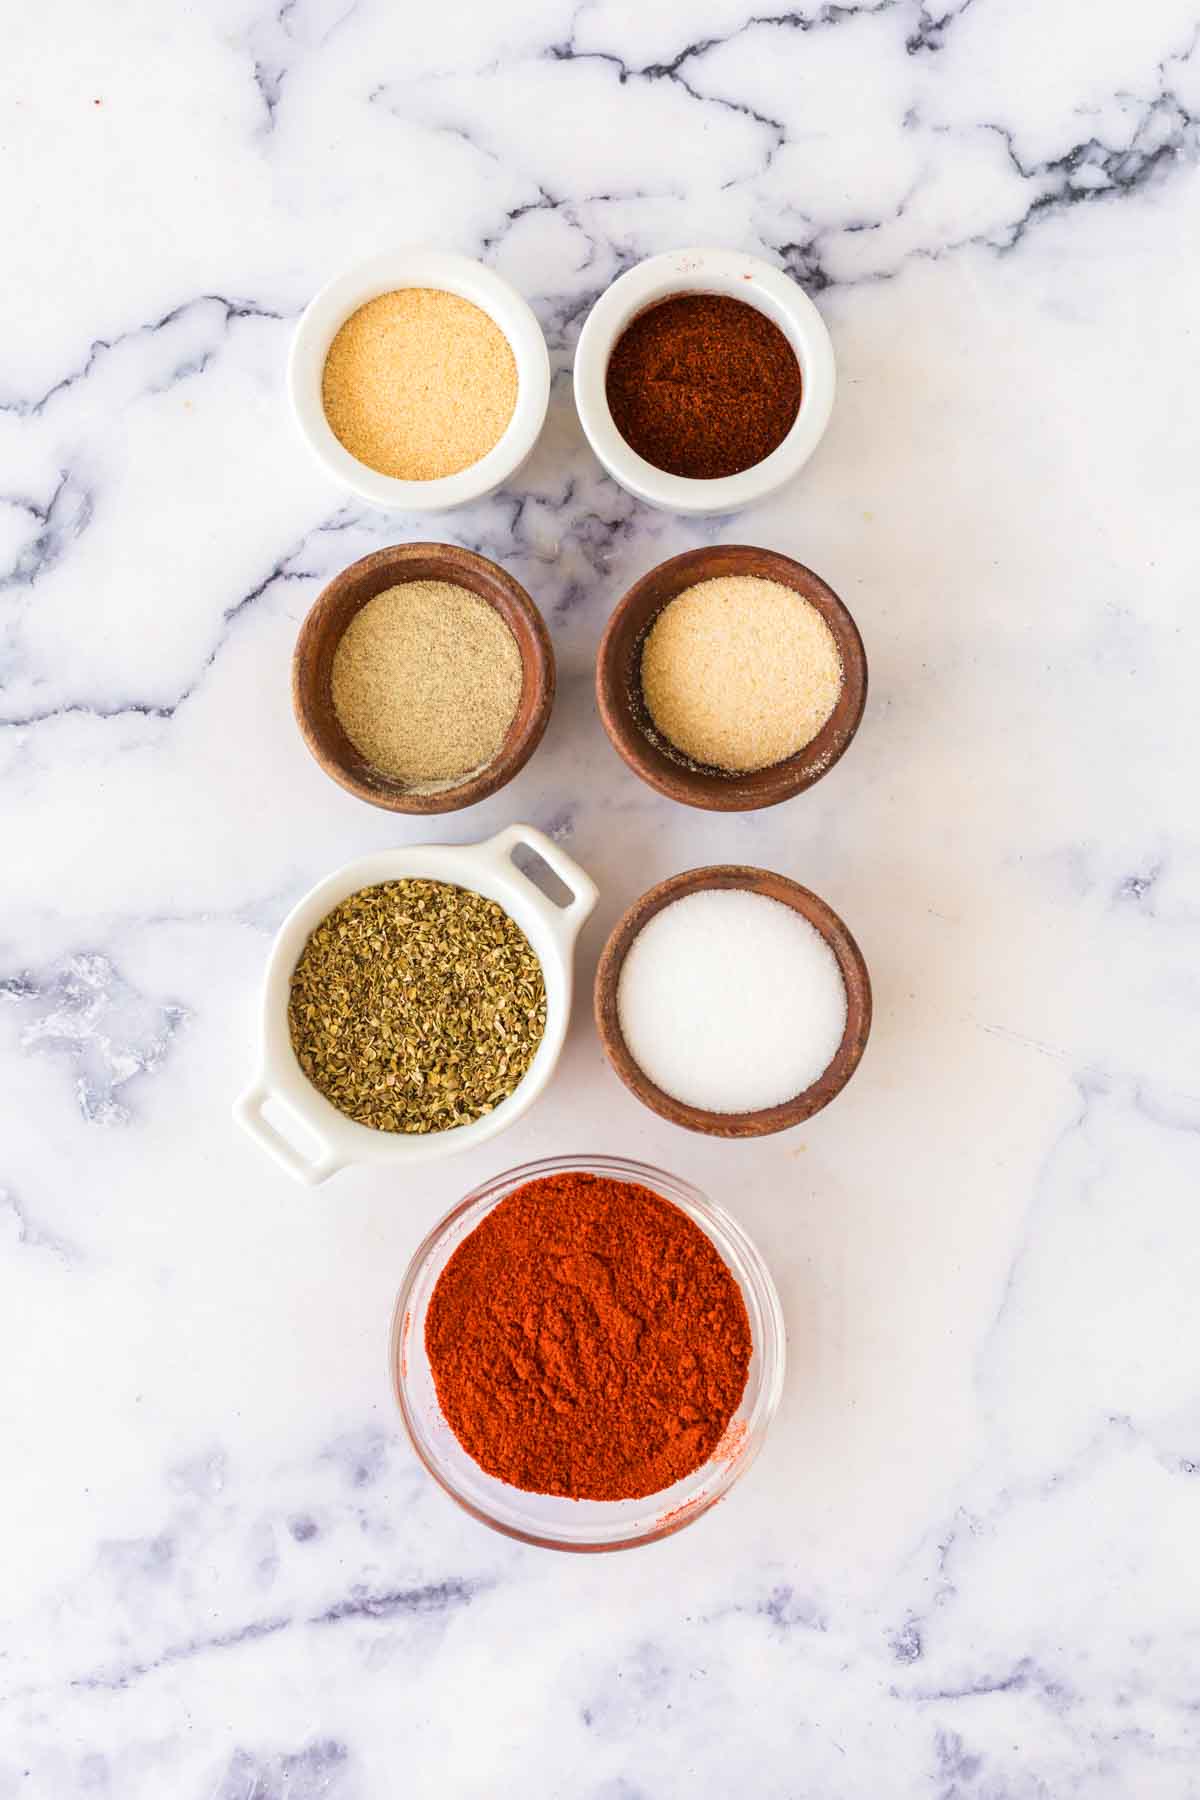 portion dishes with ingredients for cajun seasonings